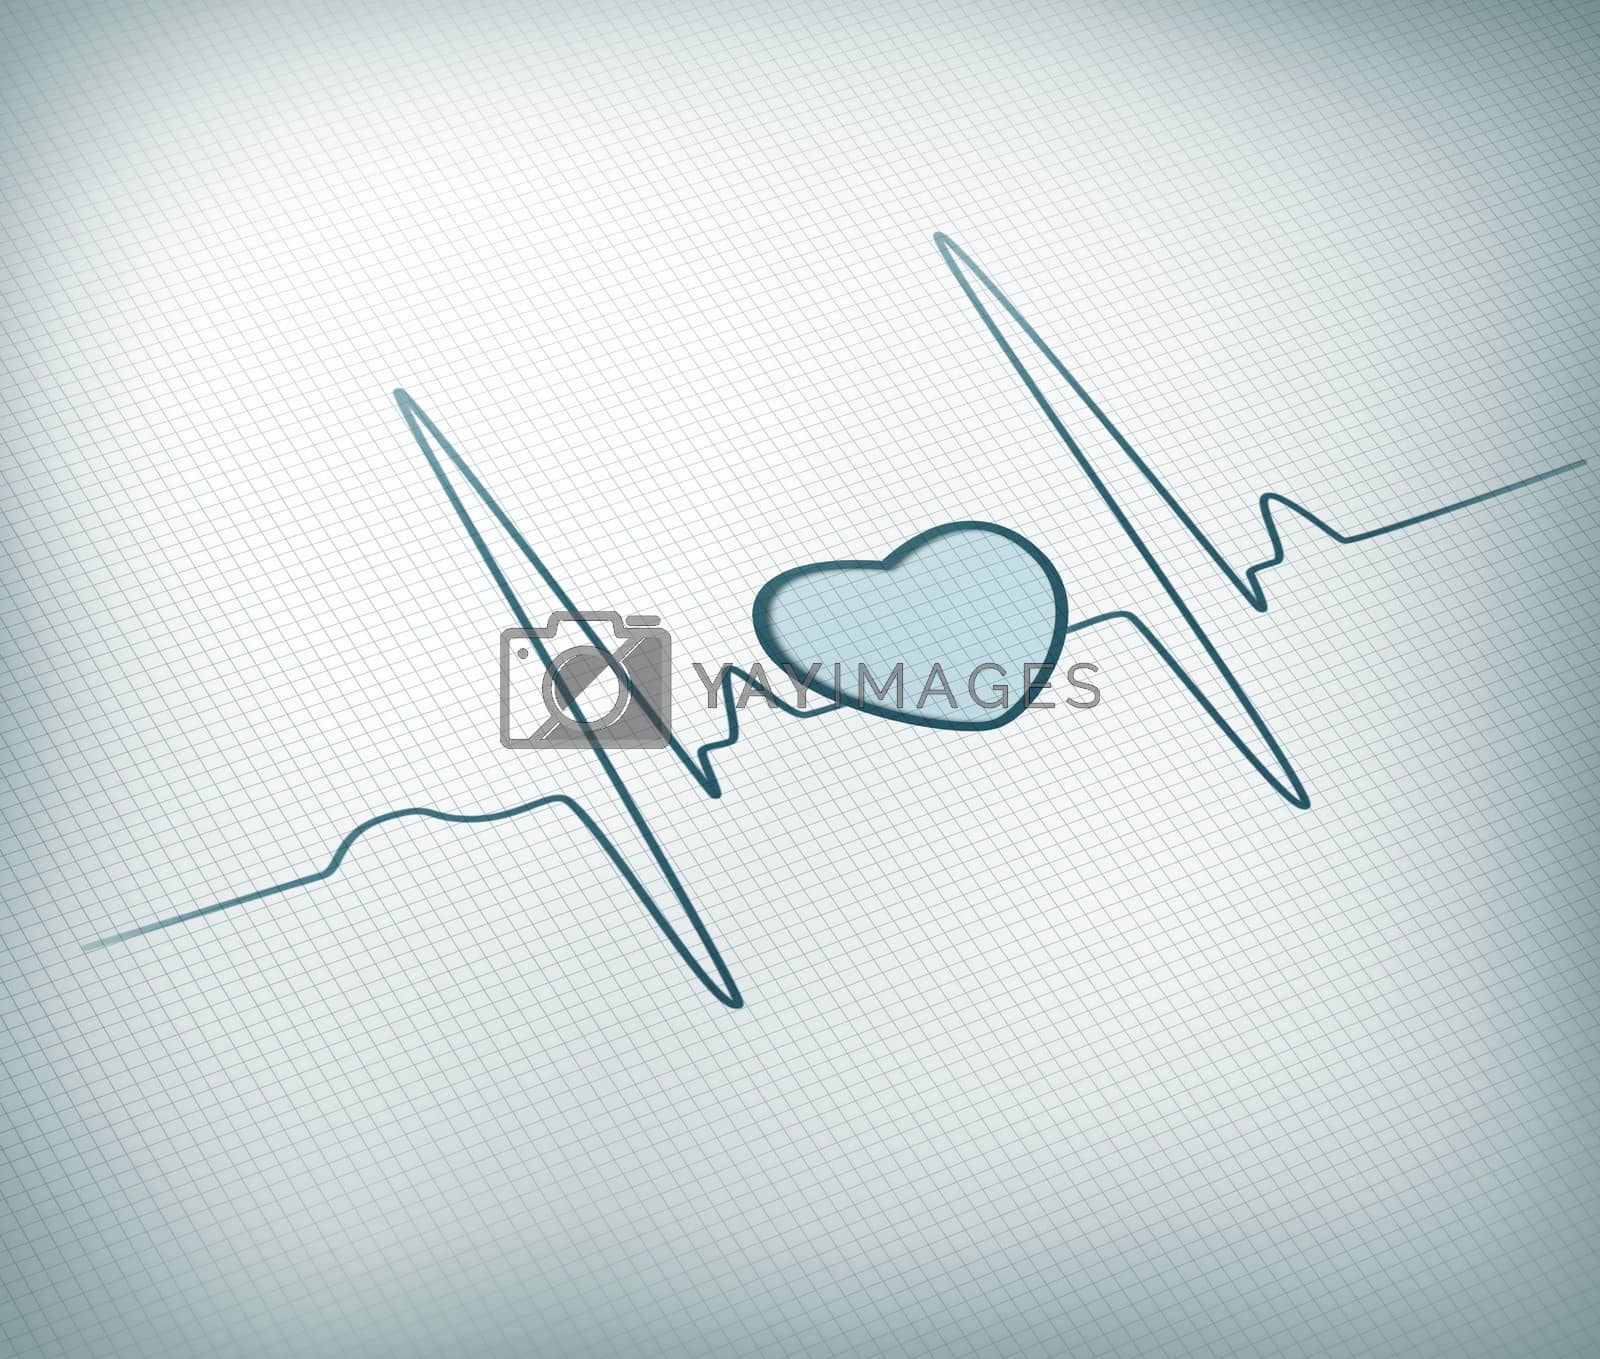 Royalty free image of Teal ECG line with healthy heart graphic by Wavebreakmedia